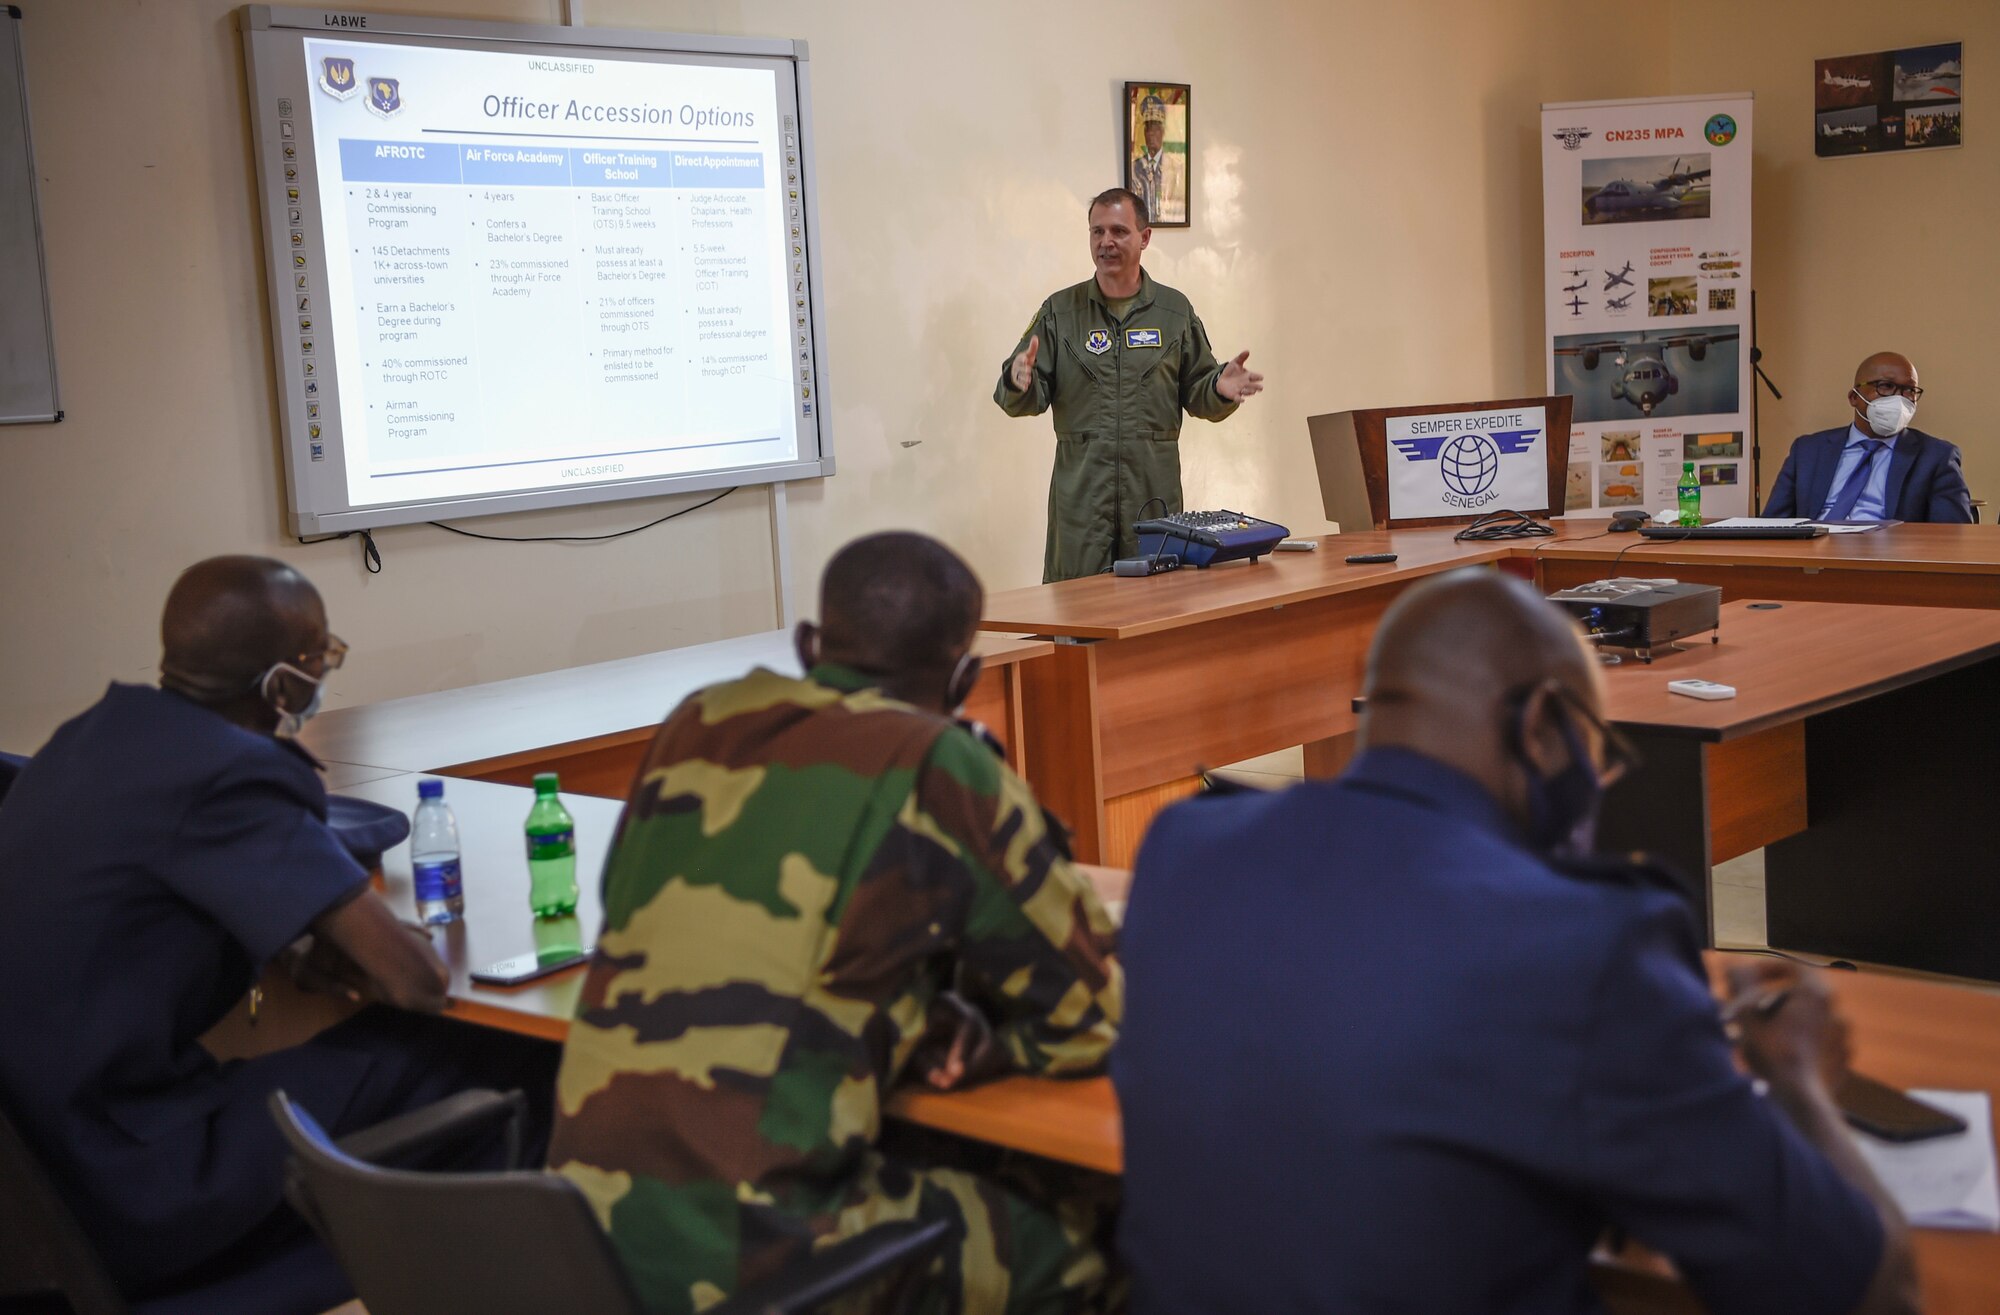 Col. Jeffery Patton, deputy director of U.S. Air Forces in Europe plans, programs and analyses, discusses U.S. Air Force doctrine with Senegalese air force members in Dakar, Senegal, May 27, 2021. Throughout the engagement, Airmen facilitated several discussions with their Senegalese peers on topics such as leadership, airmanship, administrative processes, doctrine and personnel management. (U.S. Air Force photo by 1st Lt. Hannah Durbin)